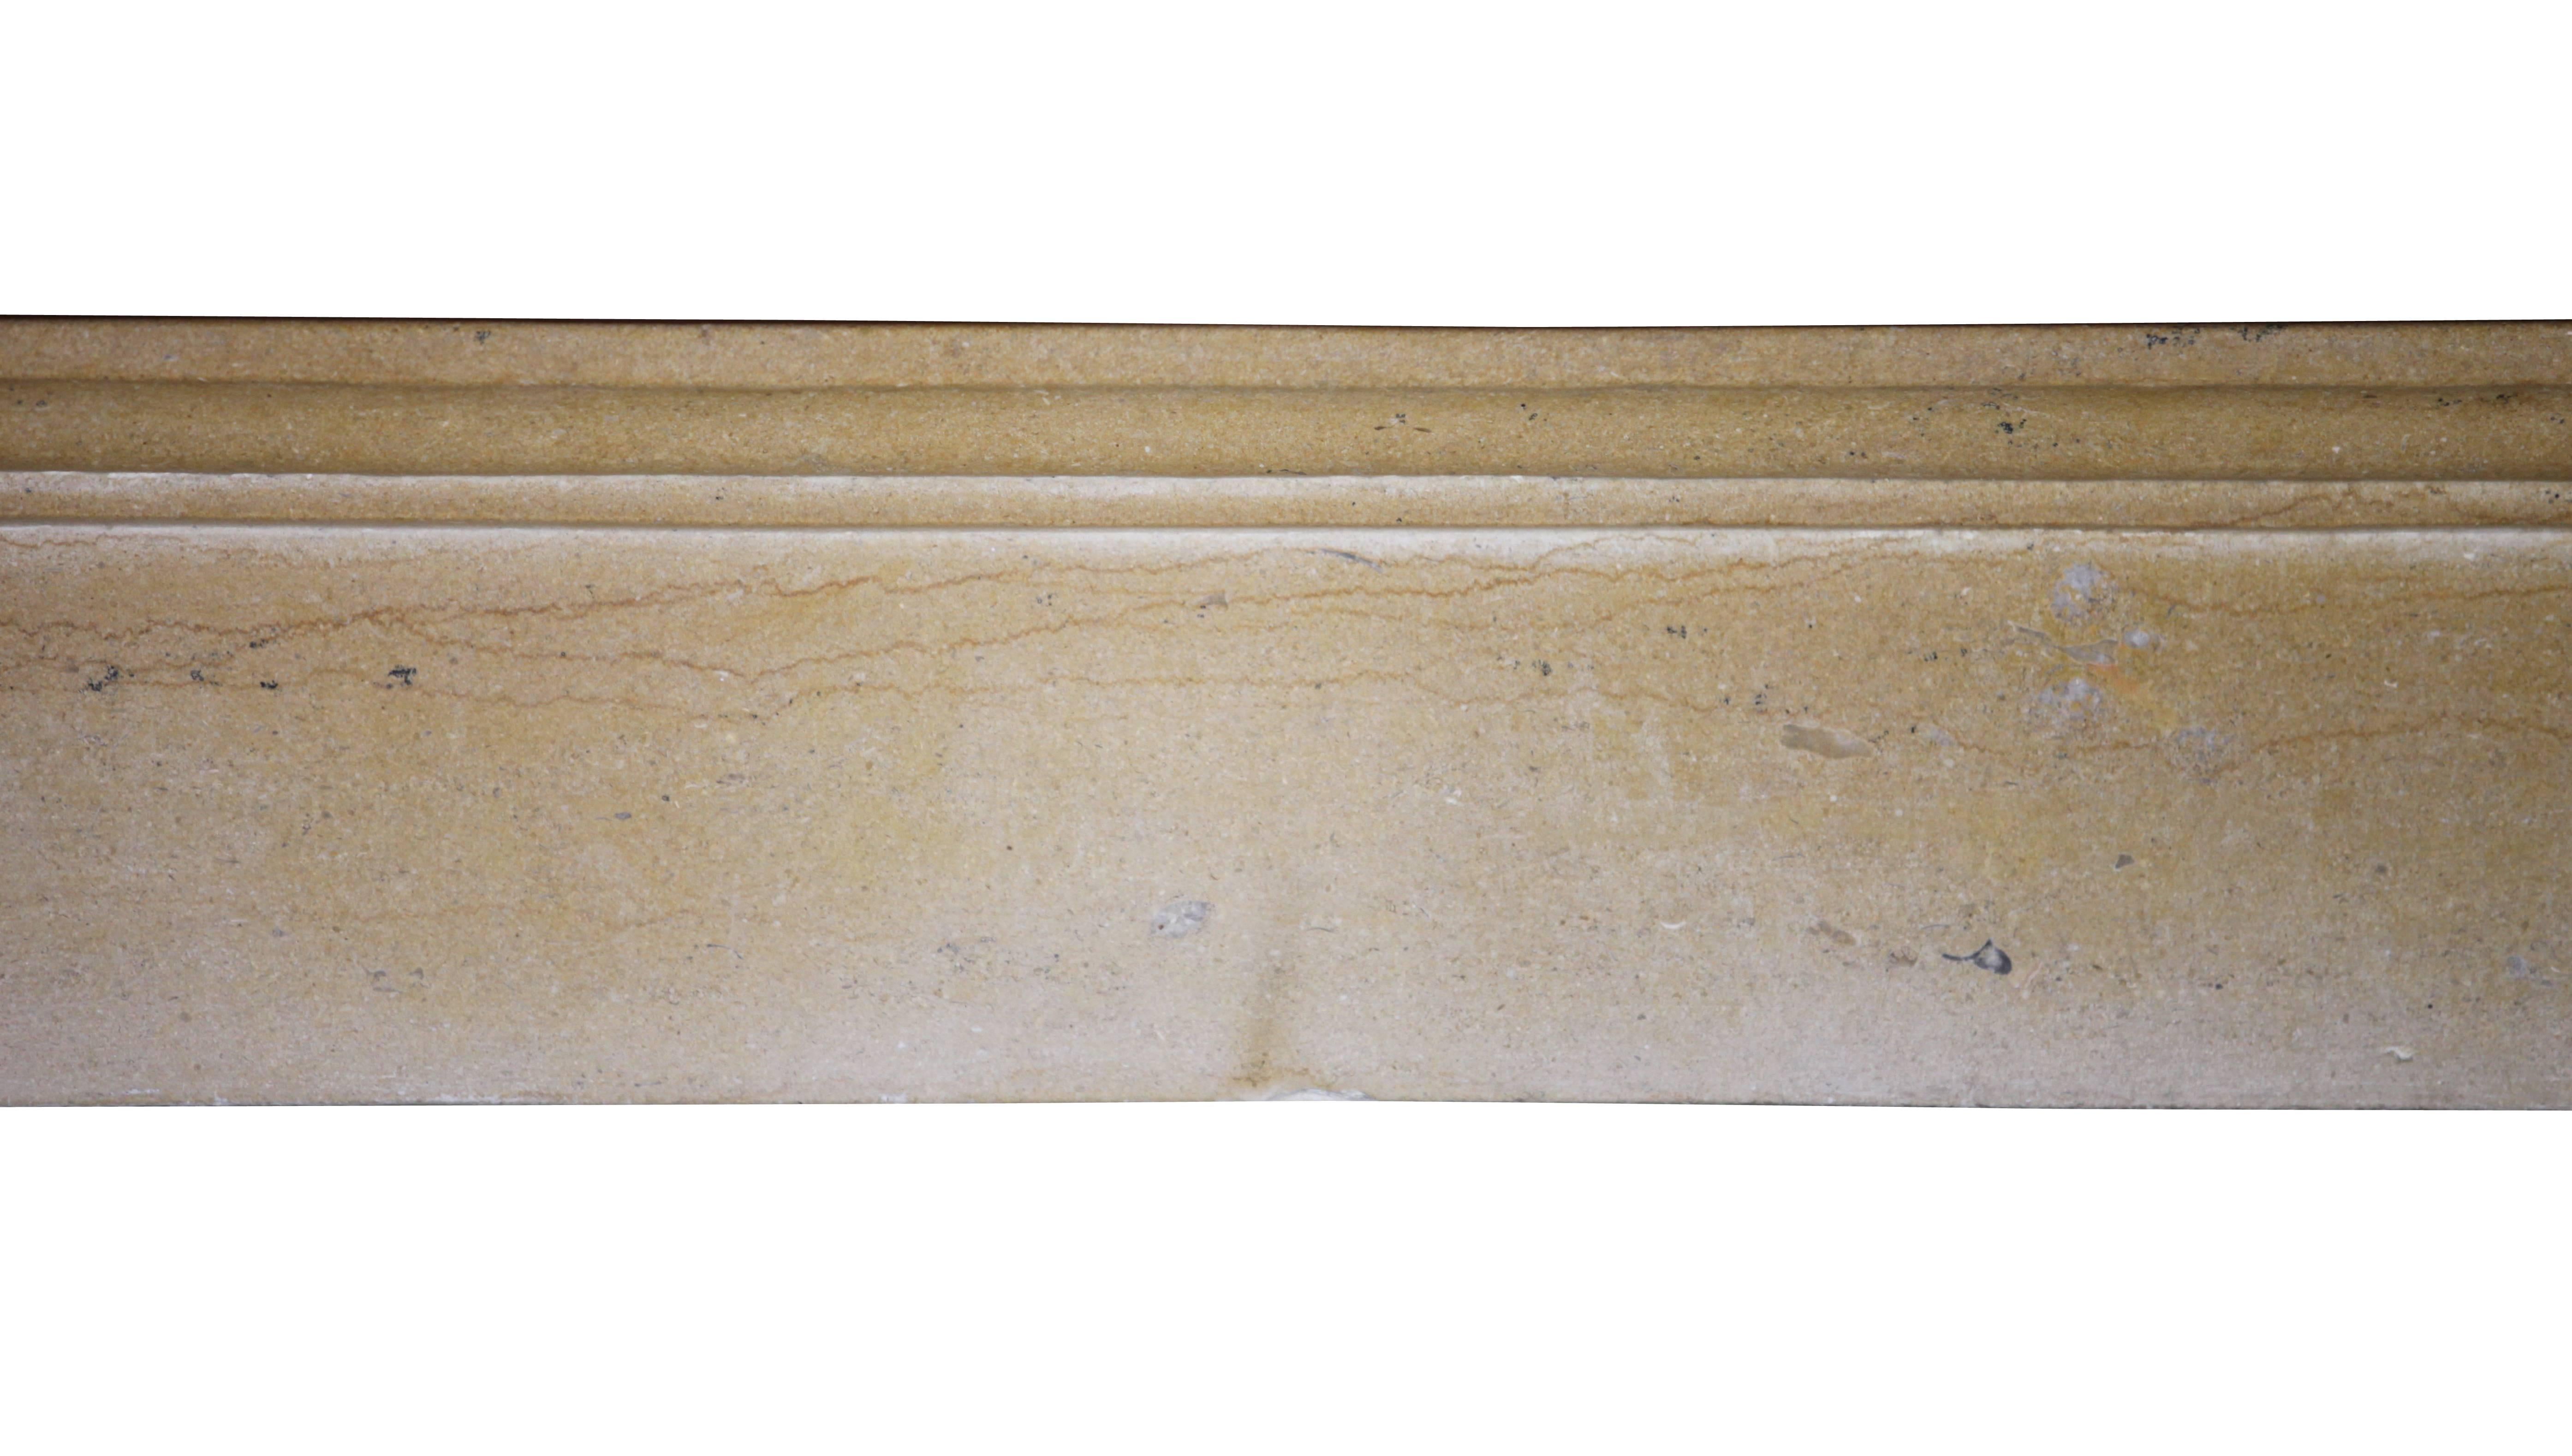 A fine European antique fireplace mantelpiece in a plain waxed limestone. A smooth ancient surface. It was built in the 19th century in the French the Burgundy region. Elegant, classy and not expensive for a timeless chique word interior design